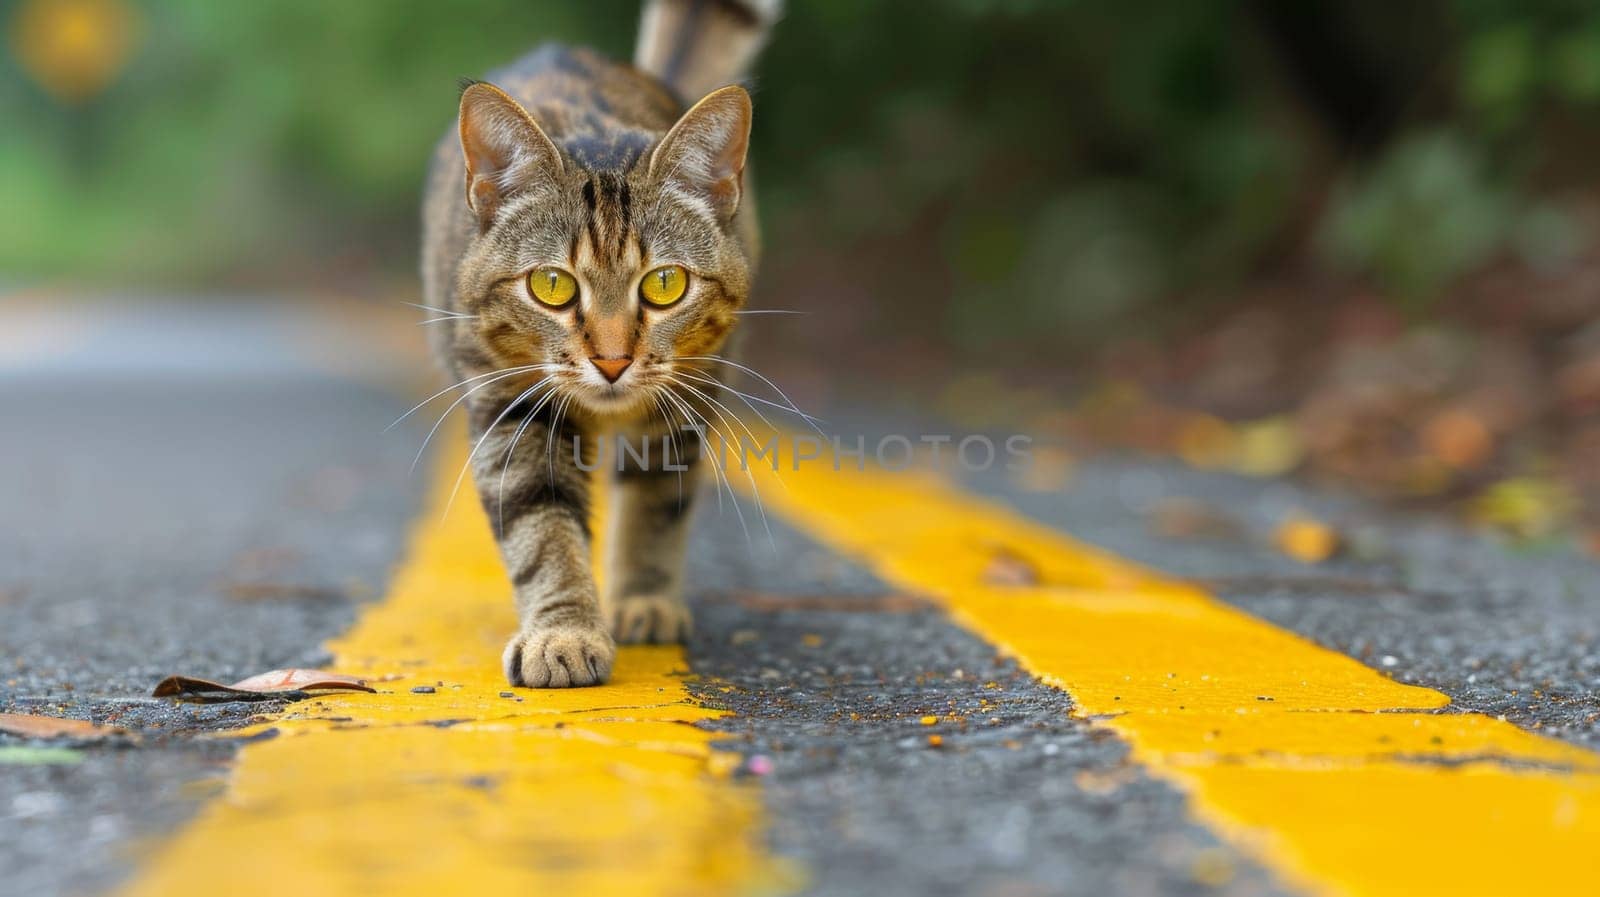 A cat walking across a yellow painted road with its eyes wide open